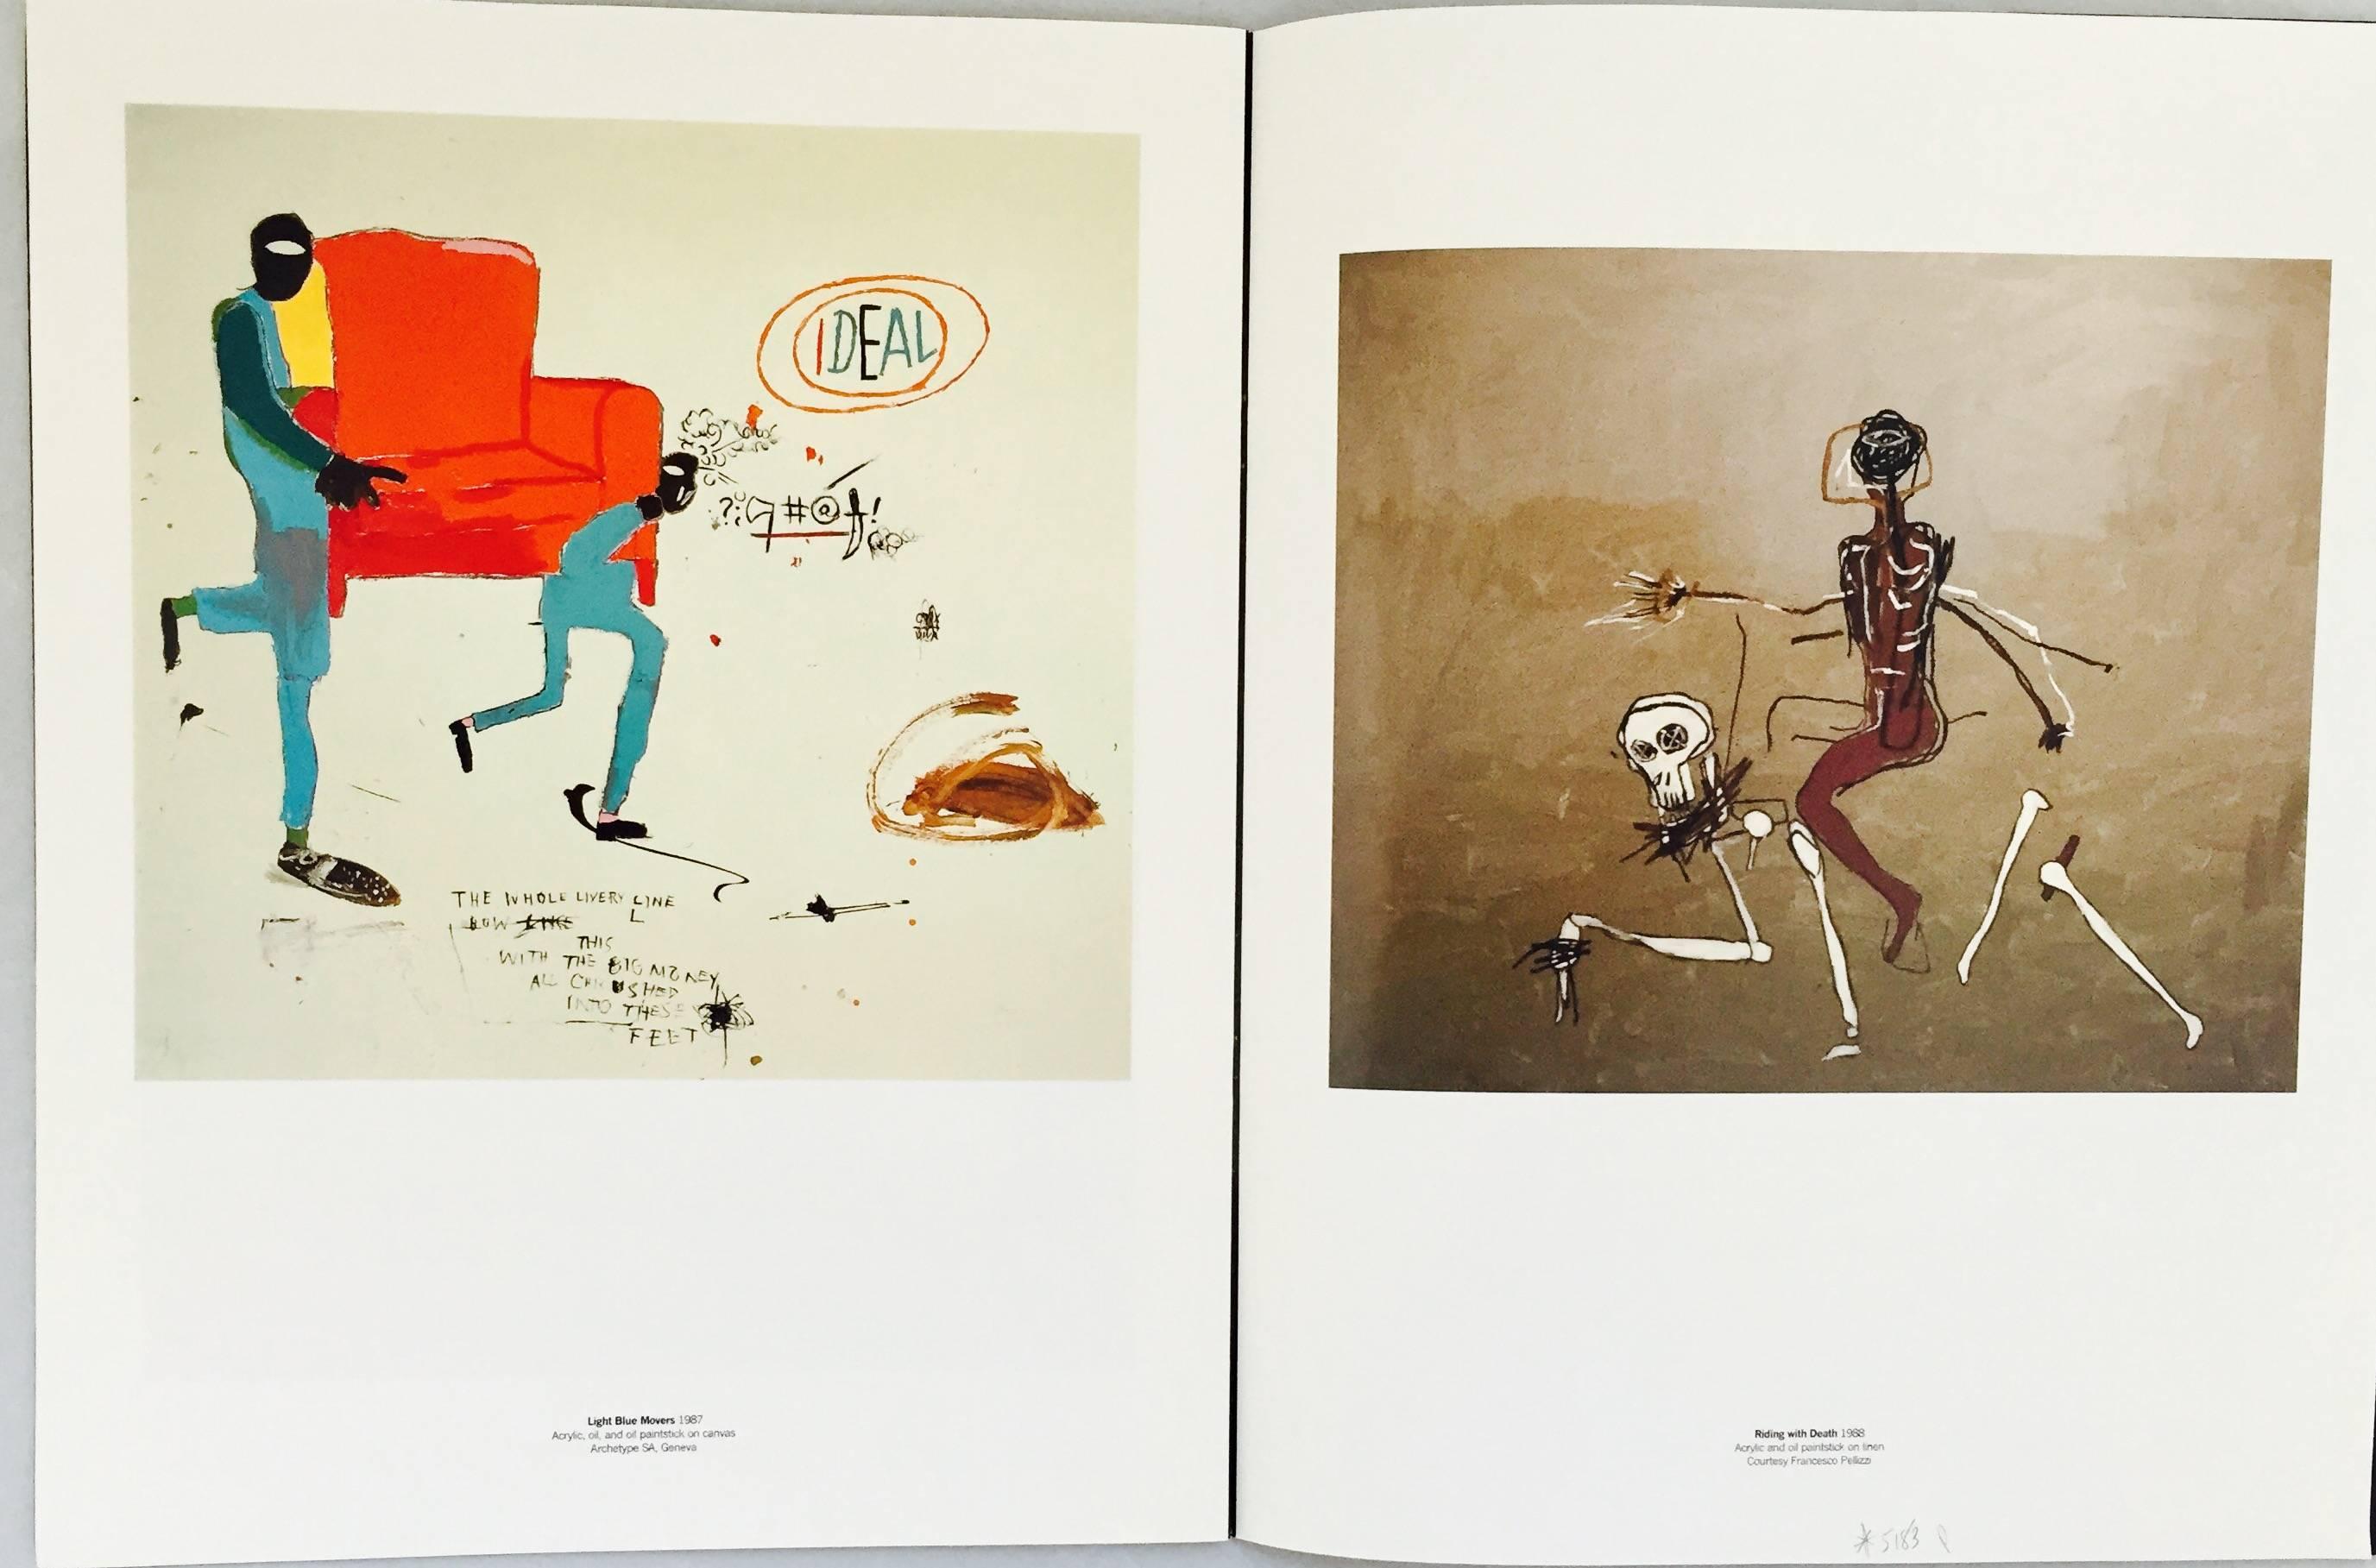 Vintage Exhibition Catalog
Jean-Michel Basquiat, Serpentine Gallery, London (6 March - 21 April 1996)

This exhibition brought together major paintings from throughout Jean-Michel Basquiat’s brief career, and was the first solo showing of his work